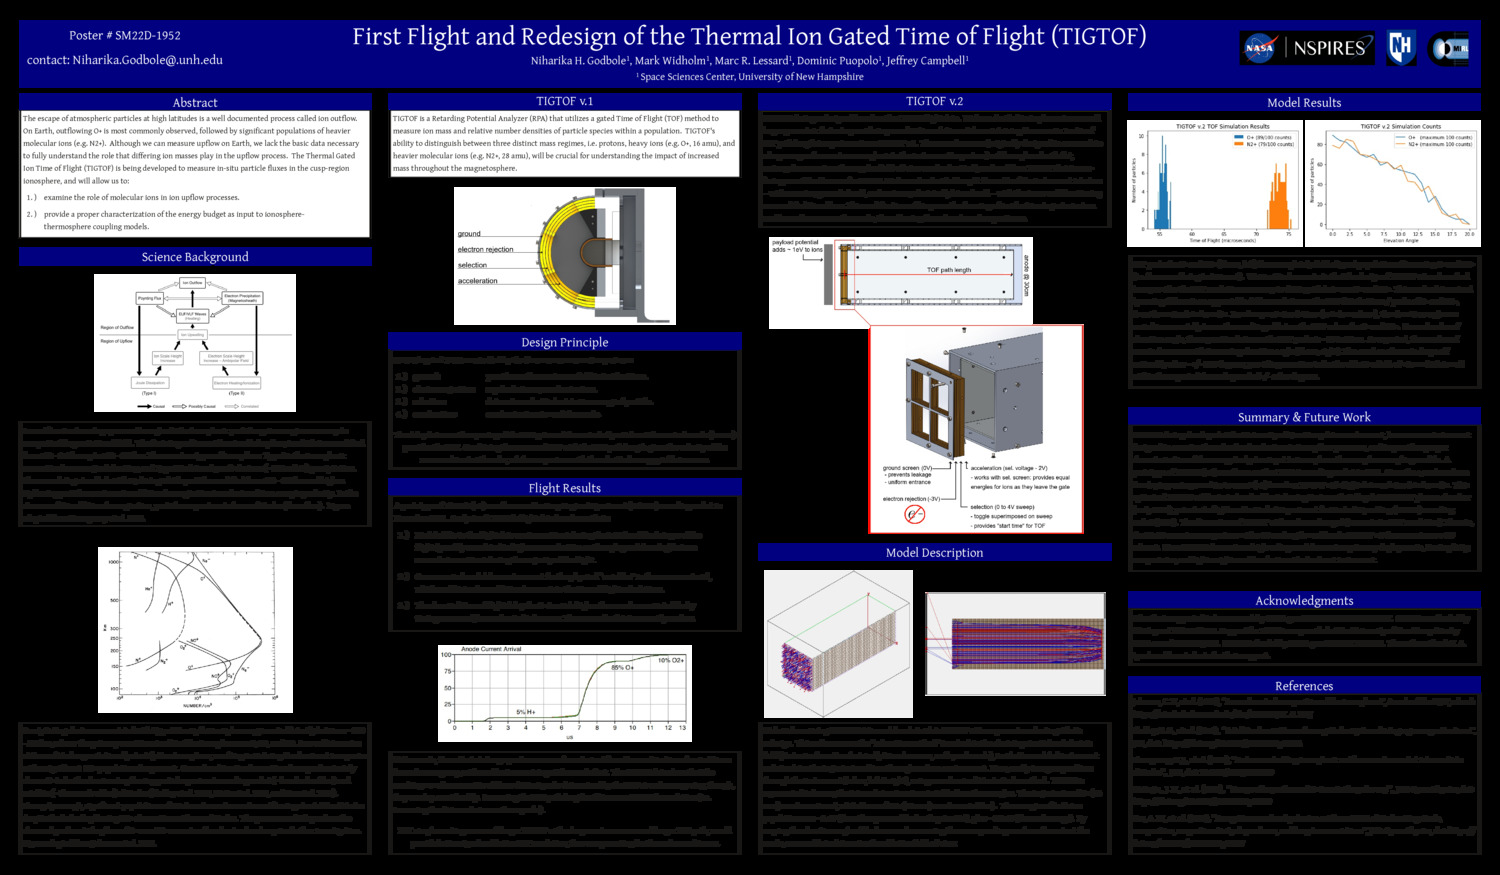 First Flight And Redesign Of The Thermal Gated Ion Time Of Flight (Tigtof) by nhg1005